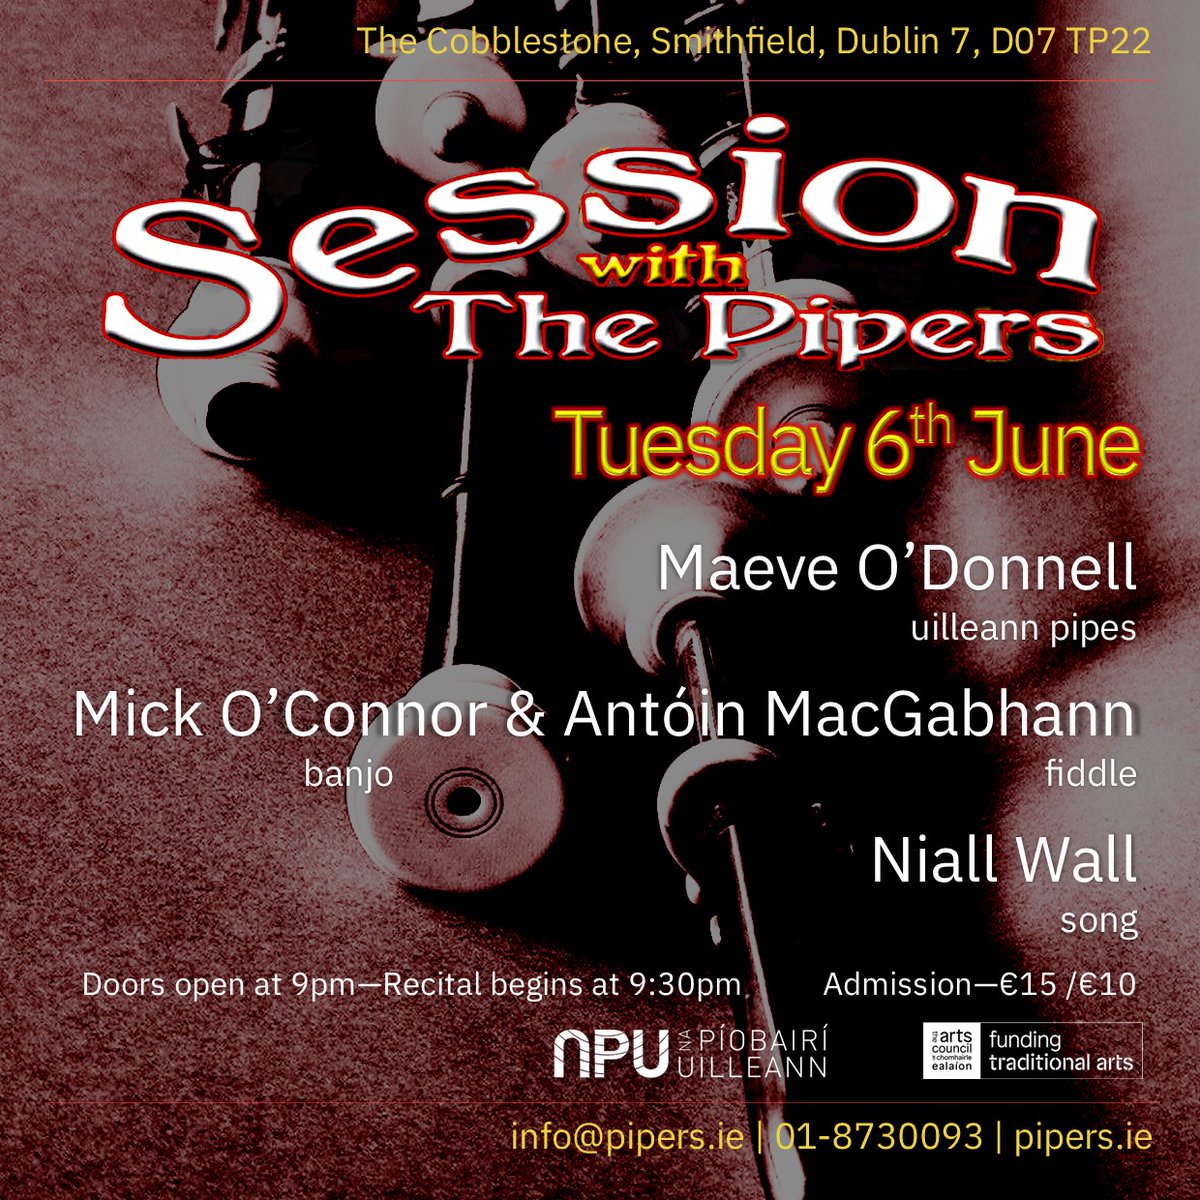 Join us in @CobblestoneDub next Tues 6th June for #SessionwiththePipers! Tickets: loom.ly/gTdv6q4

This month's performers are Maeve O'Donnell, Mick O'Connor, Antóin MacGabhann & Niall Wall!

#napiobairi #uilleann #sharingthesound #performance @artscouncil_ie